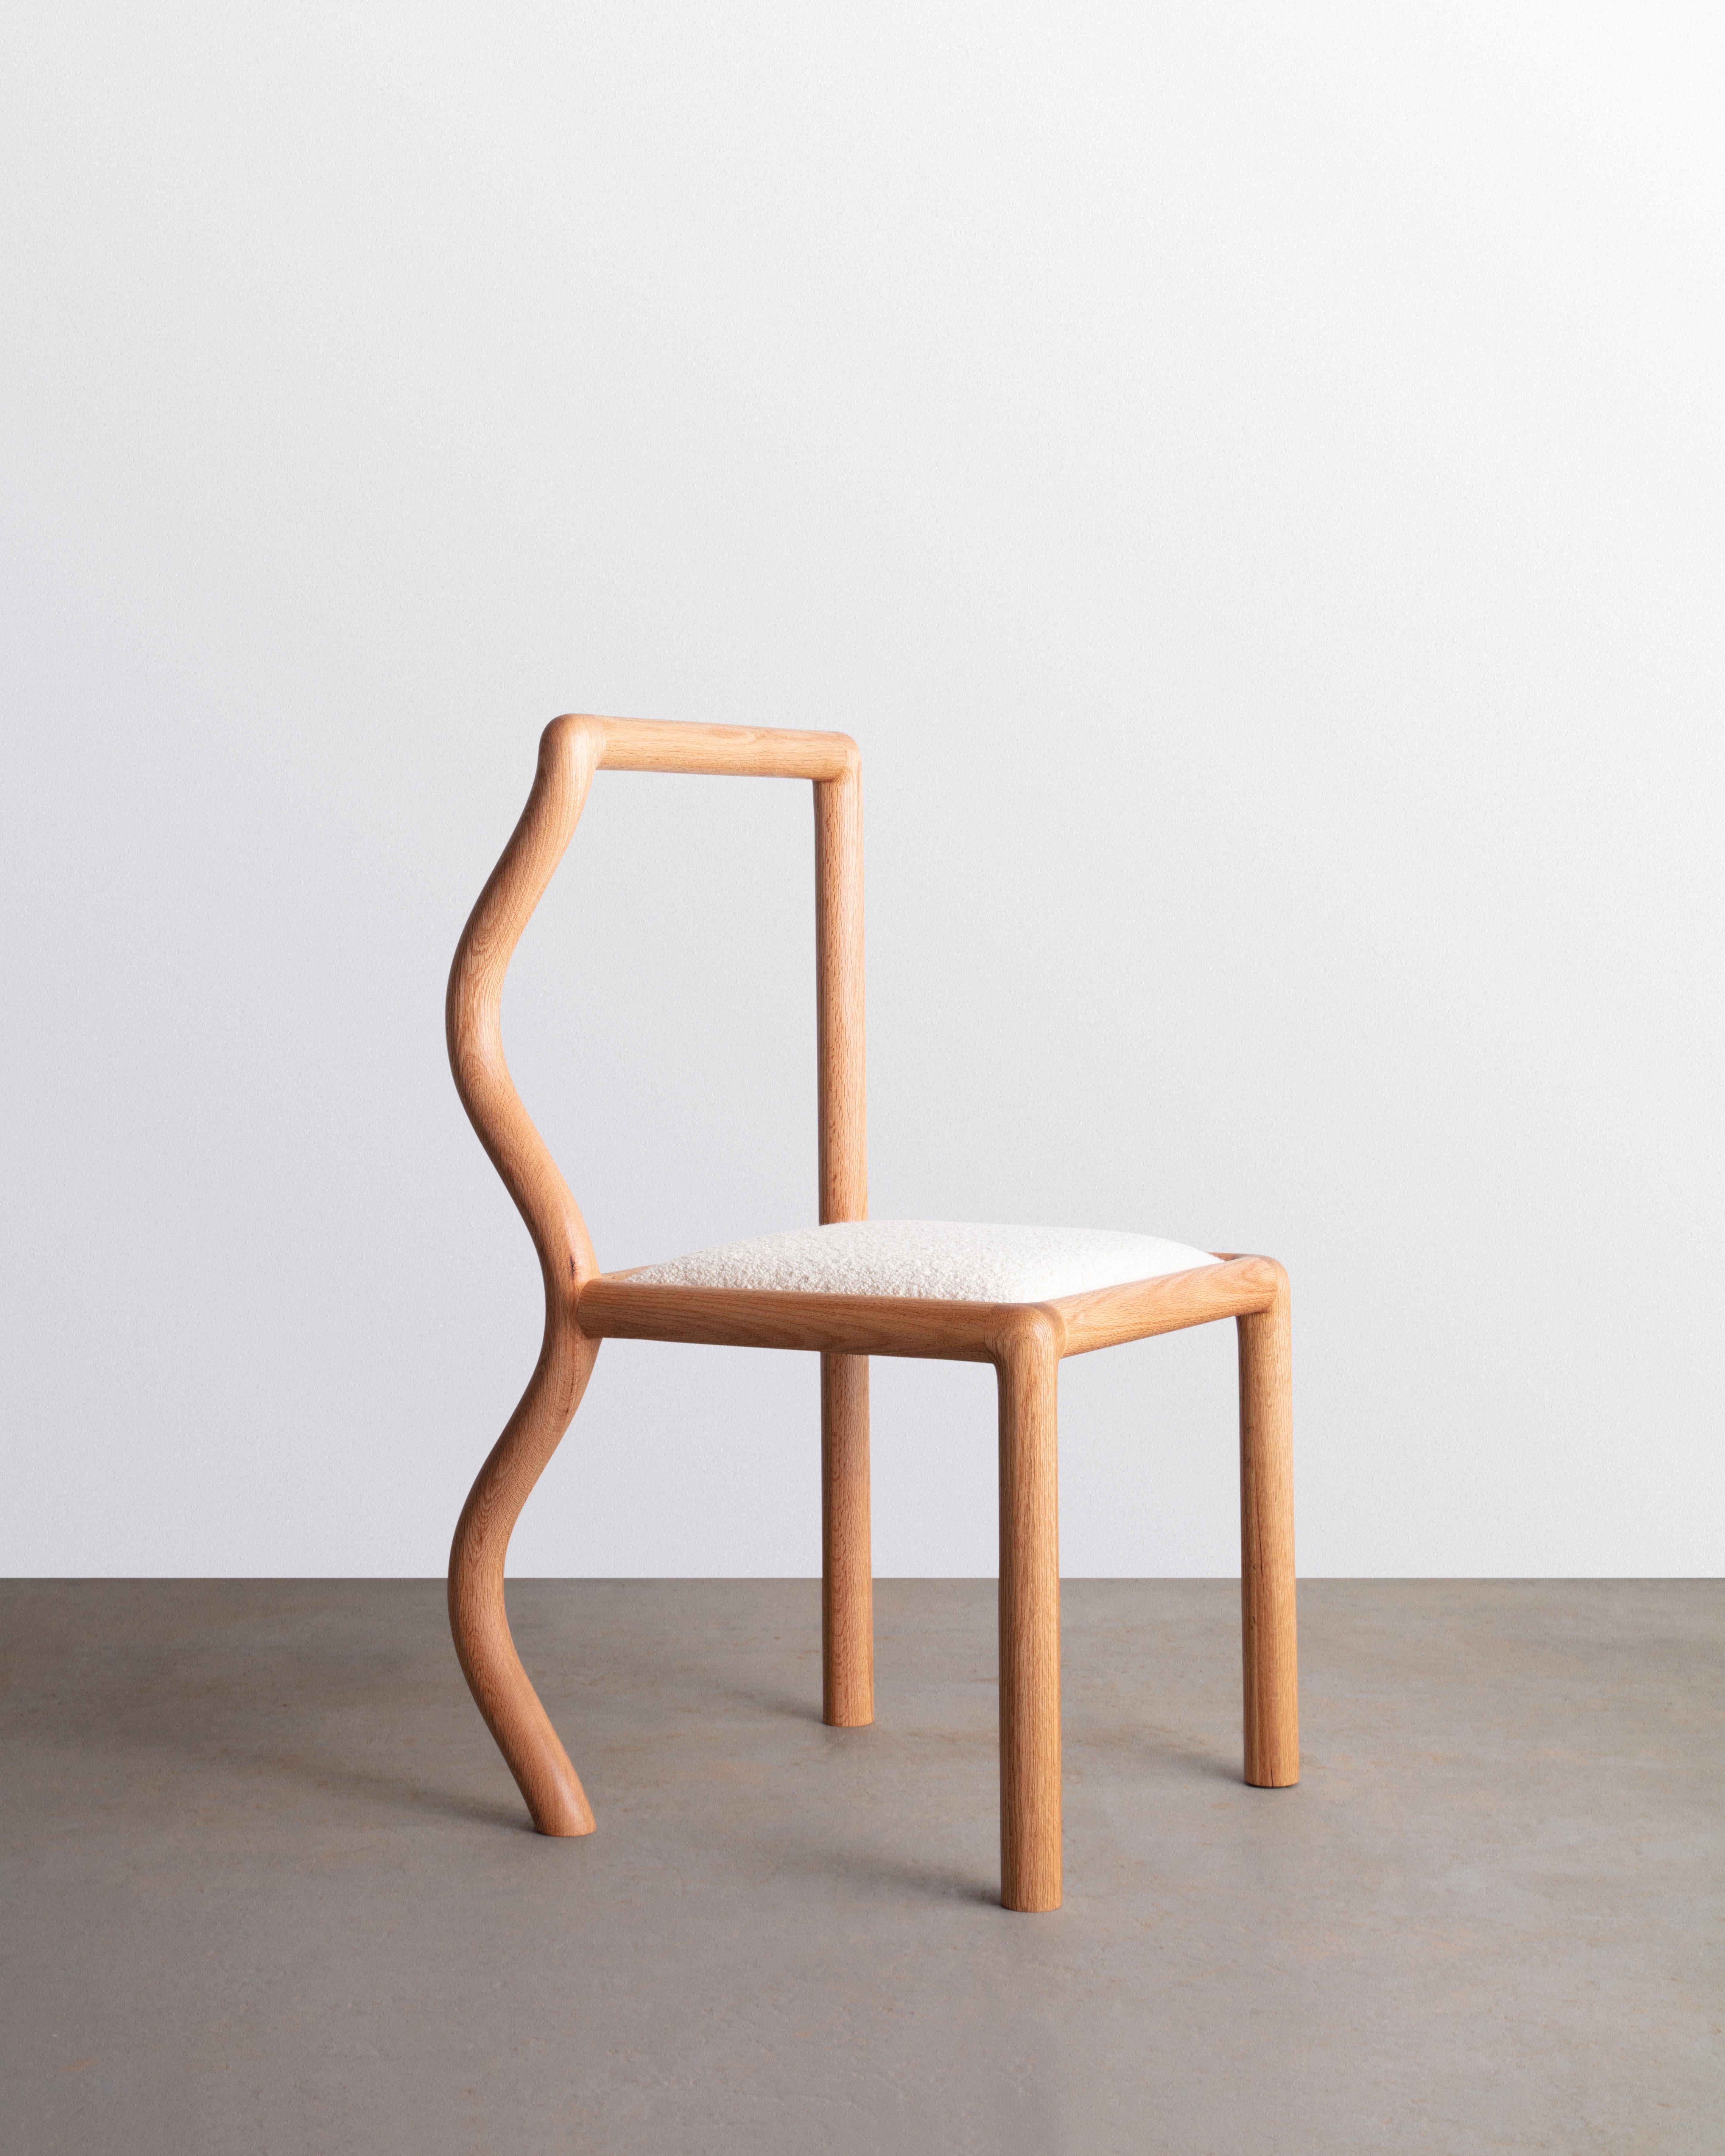 The Squiggle chair was created though an exploration of shaping solid Oak slab lumber. Designed to bring a smile to any space, each chair part is thoughtfully selected to highlight the grain pattern and characteristics of American Red Oak. The seat